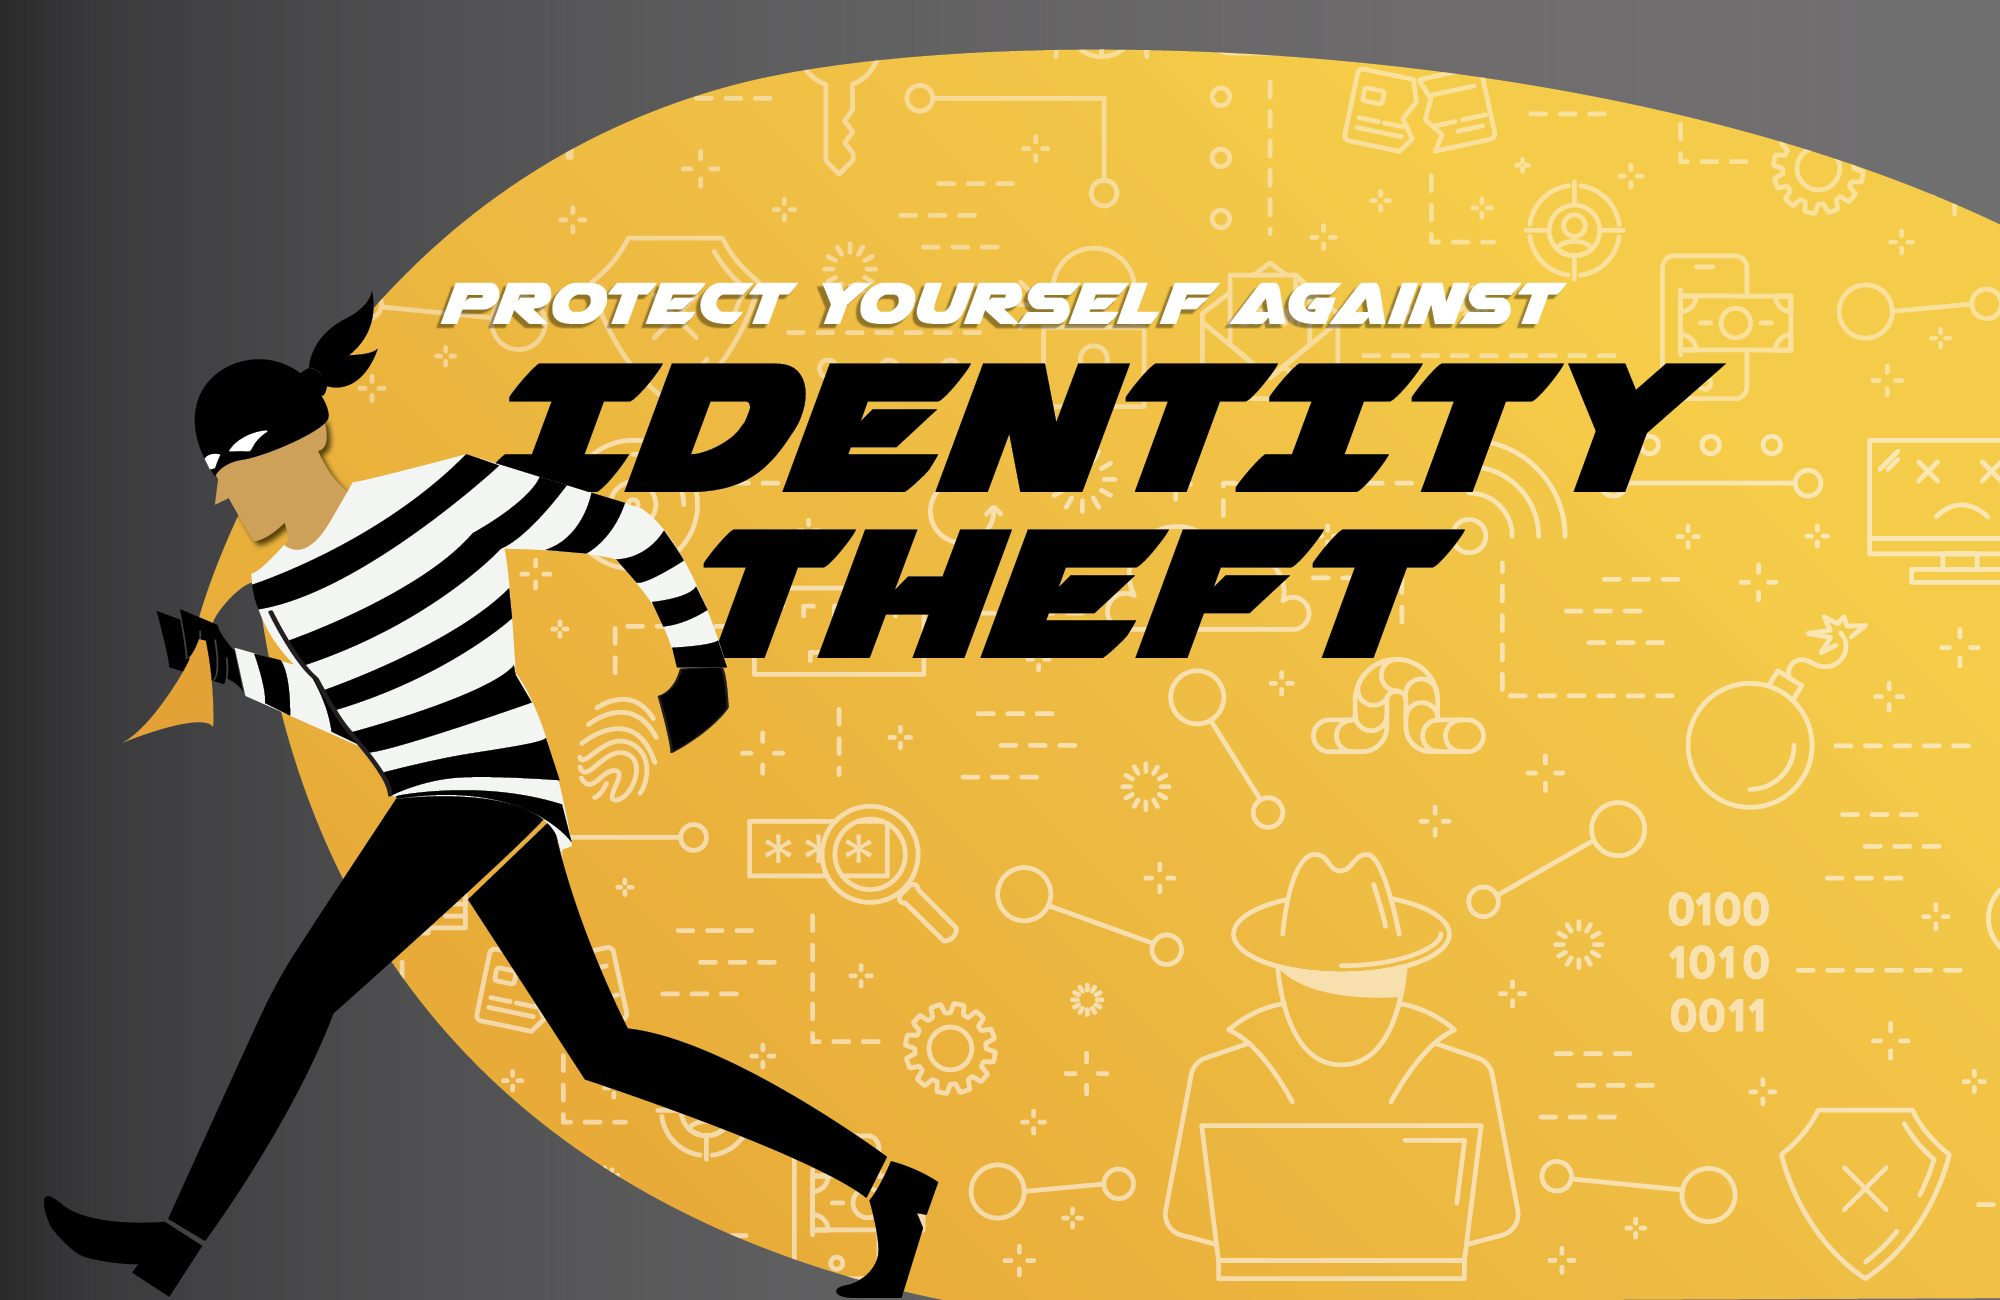 Protect yourself from identity theft with these 10 tips